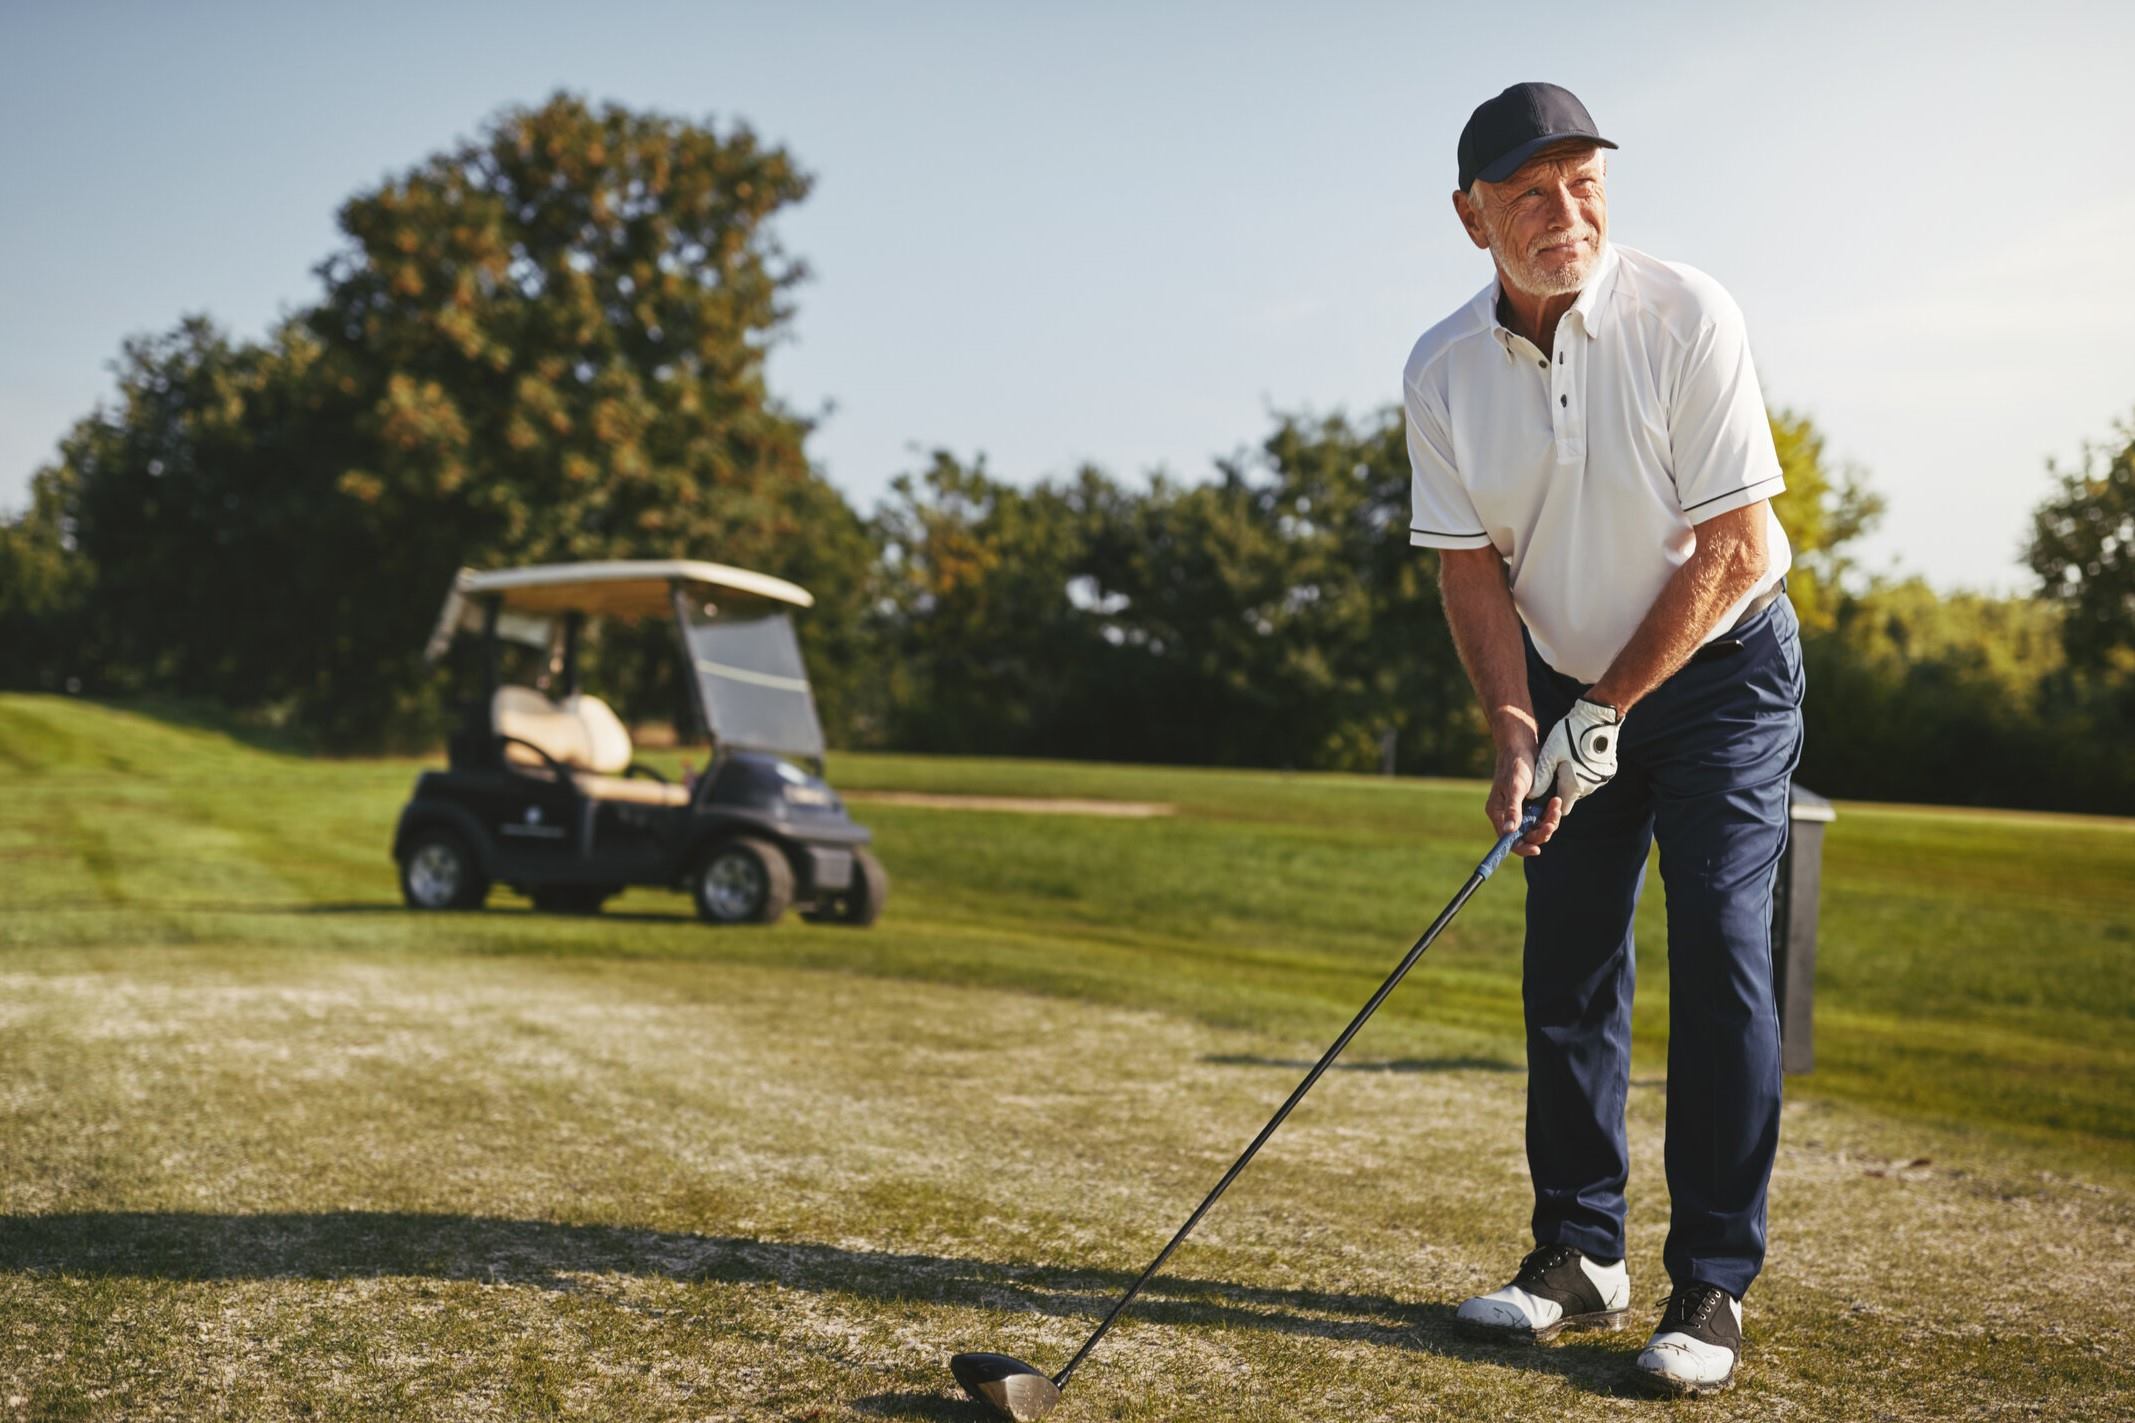 Top Golf Clubs For Seniors: Perfect For Easy Swings!